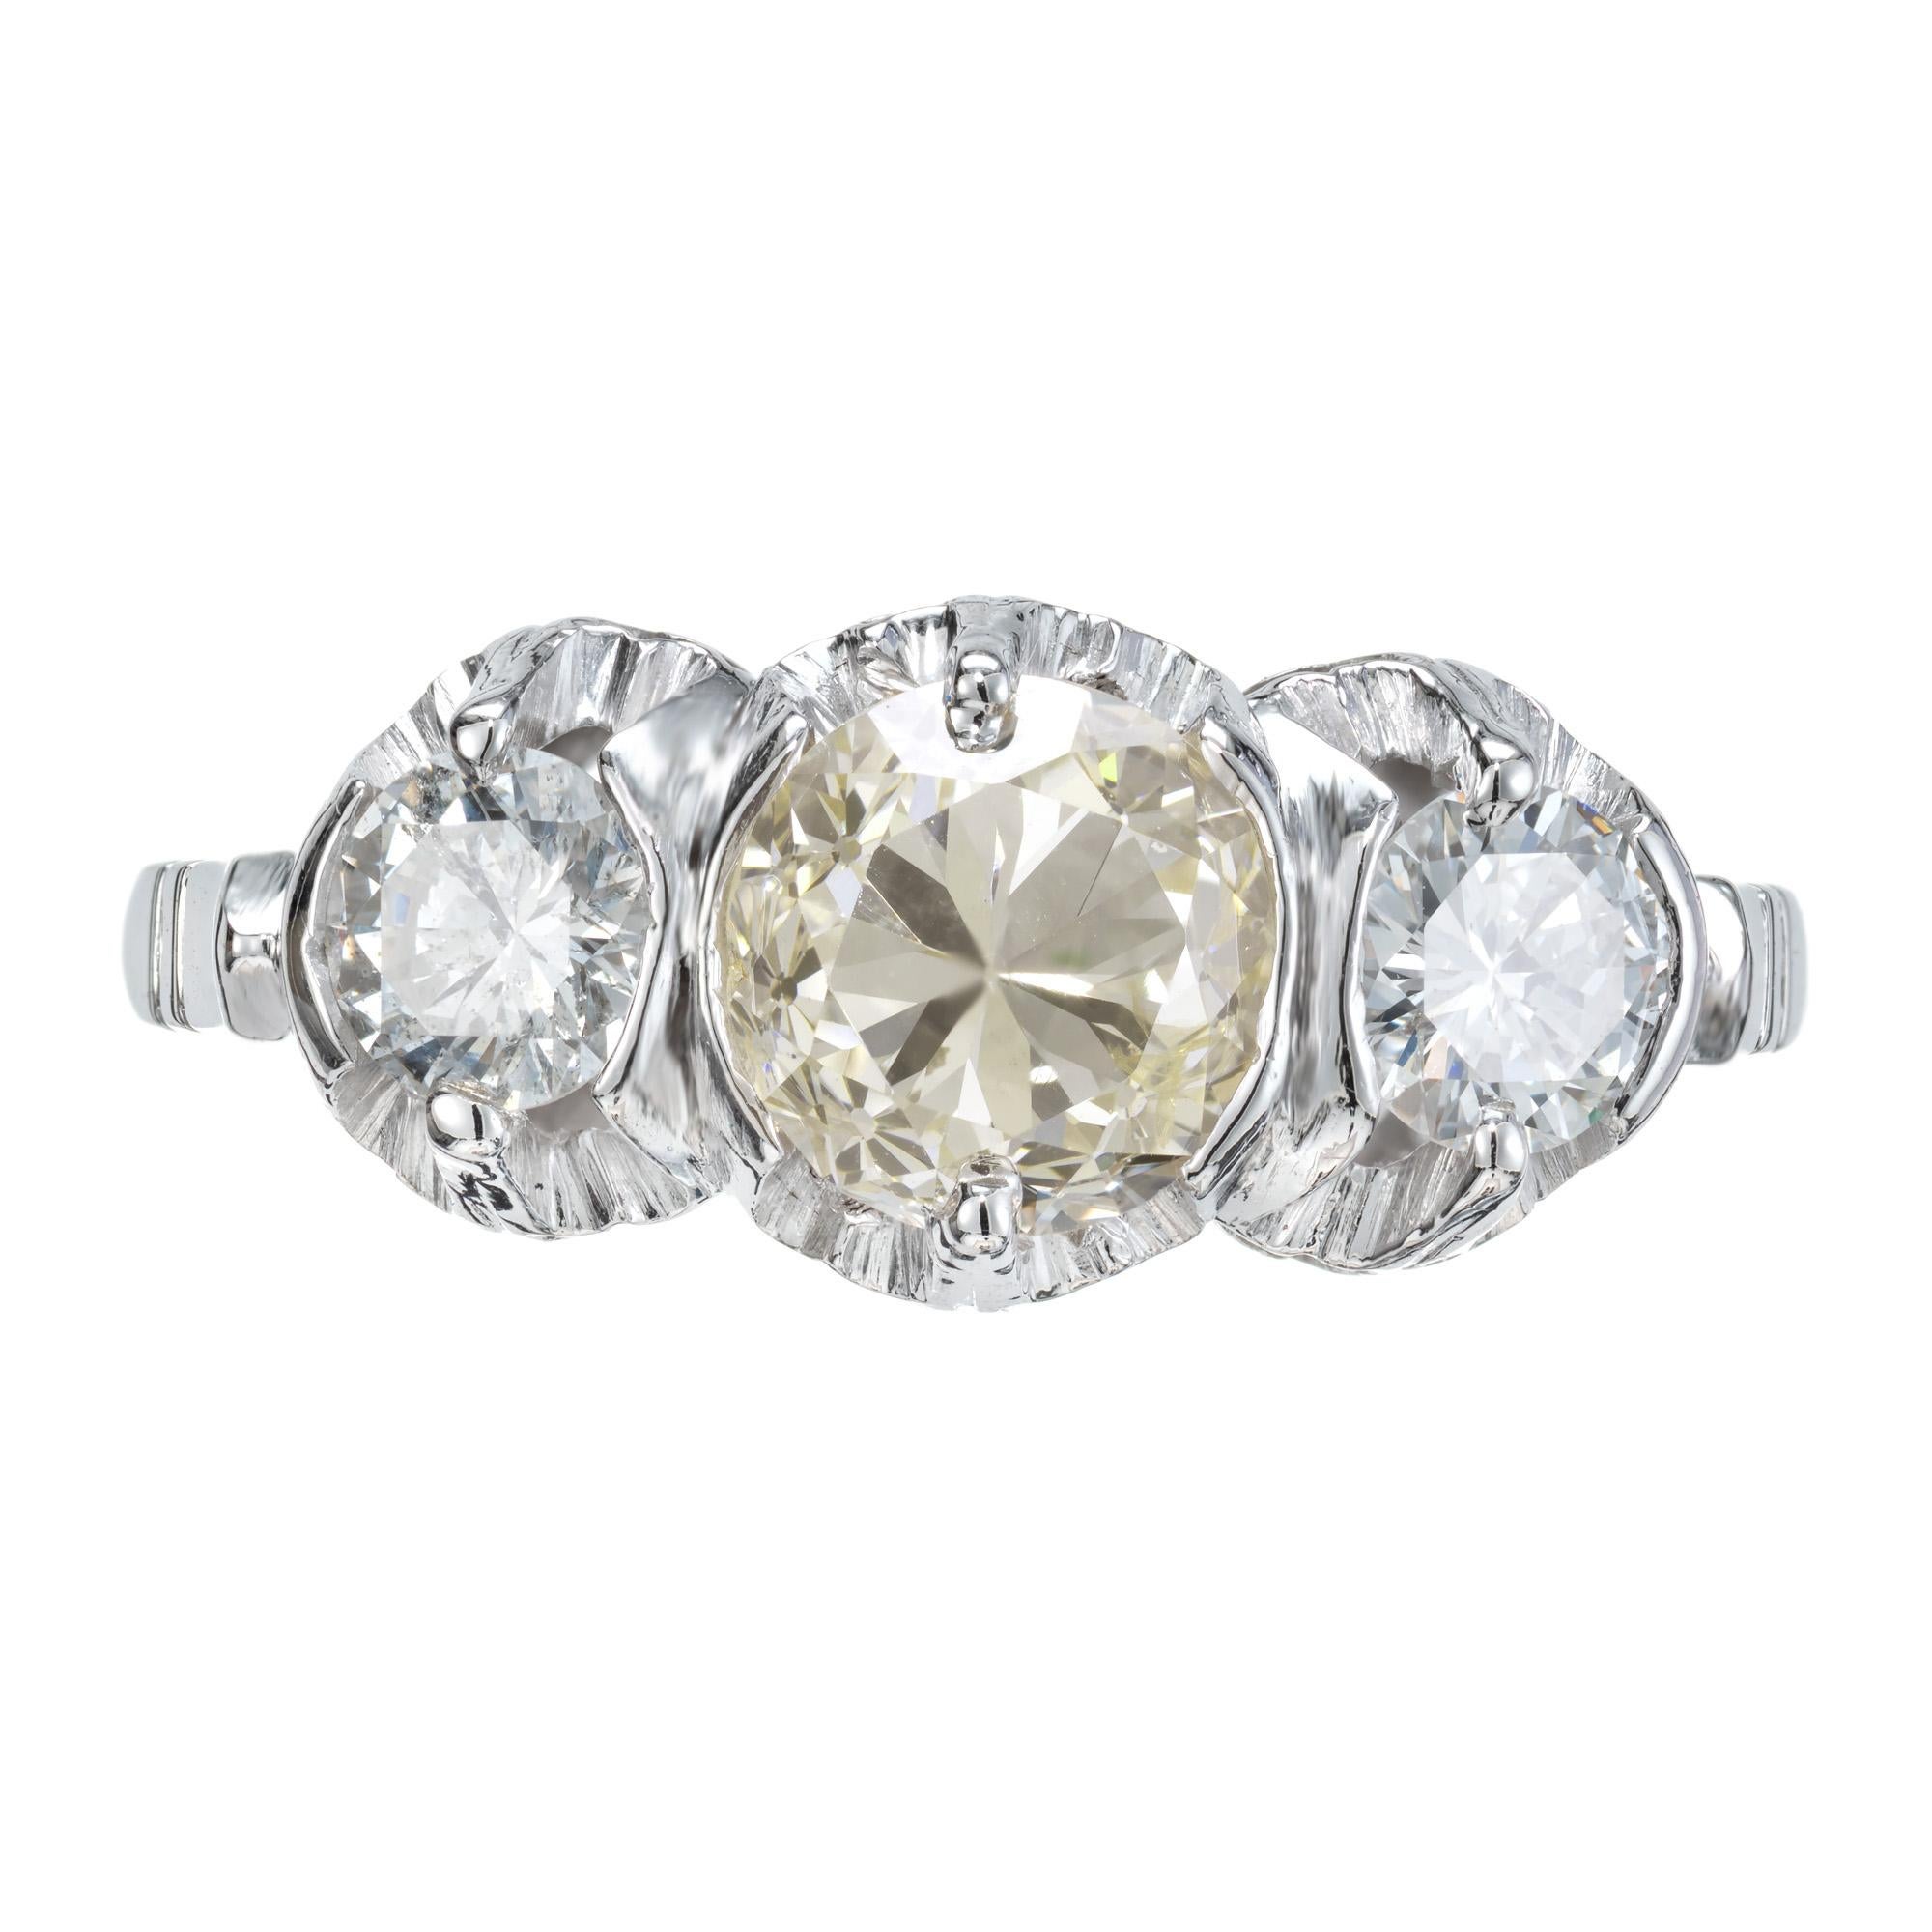 1930's Art Deco three-stone diamond ring. 1.00ct Old European cut diamond center stone. Mounted in a platinum three-stone setting. Accented with 2 round side diamonds.  Each stone is secured with tow semi bezels and two prongs. The center diamond is